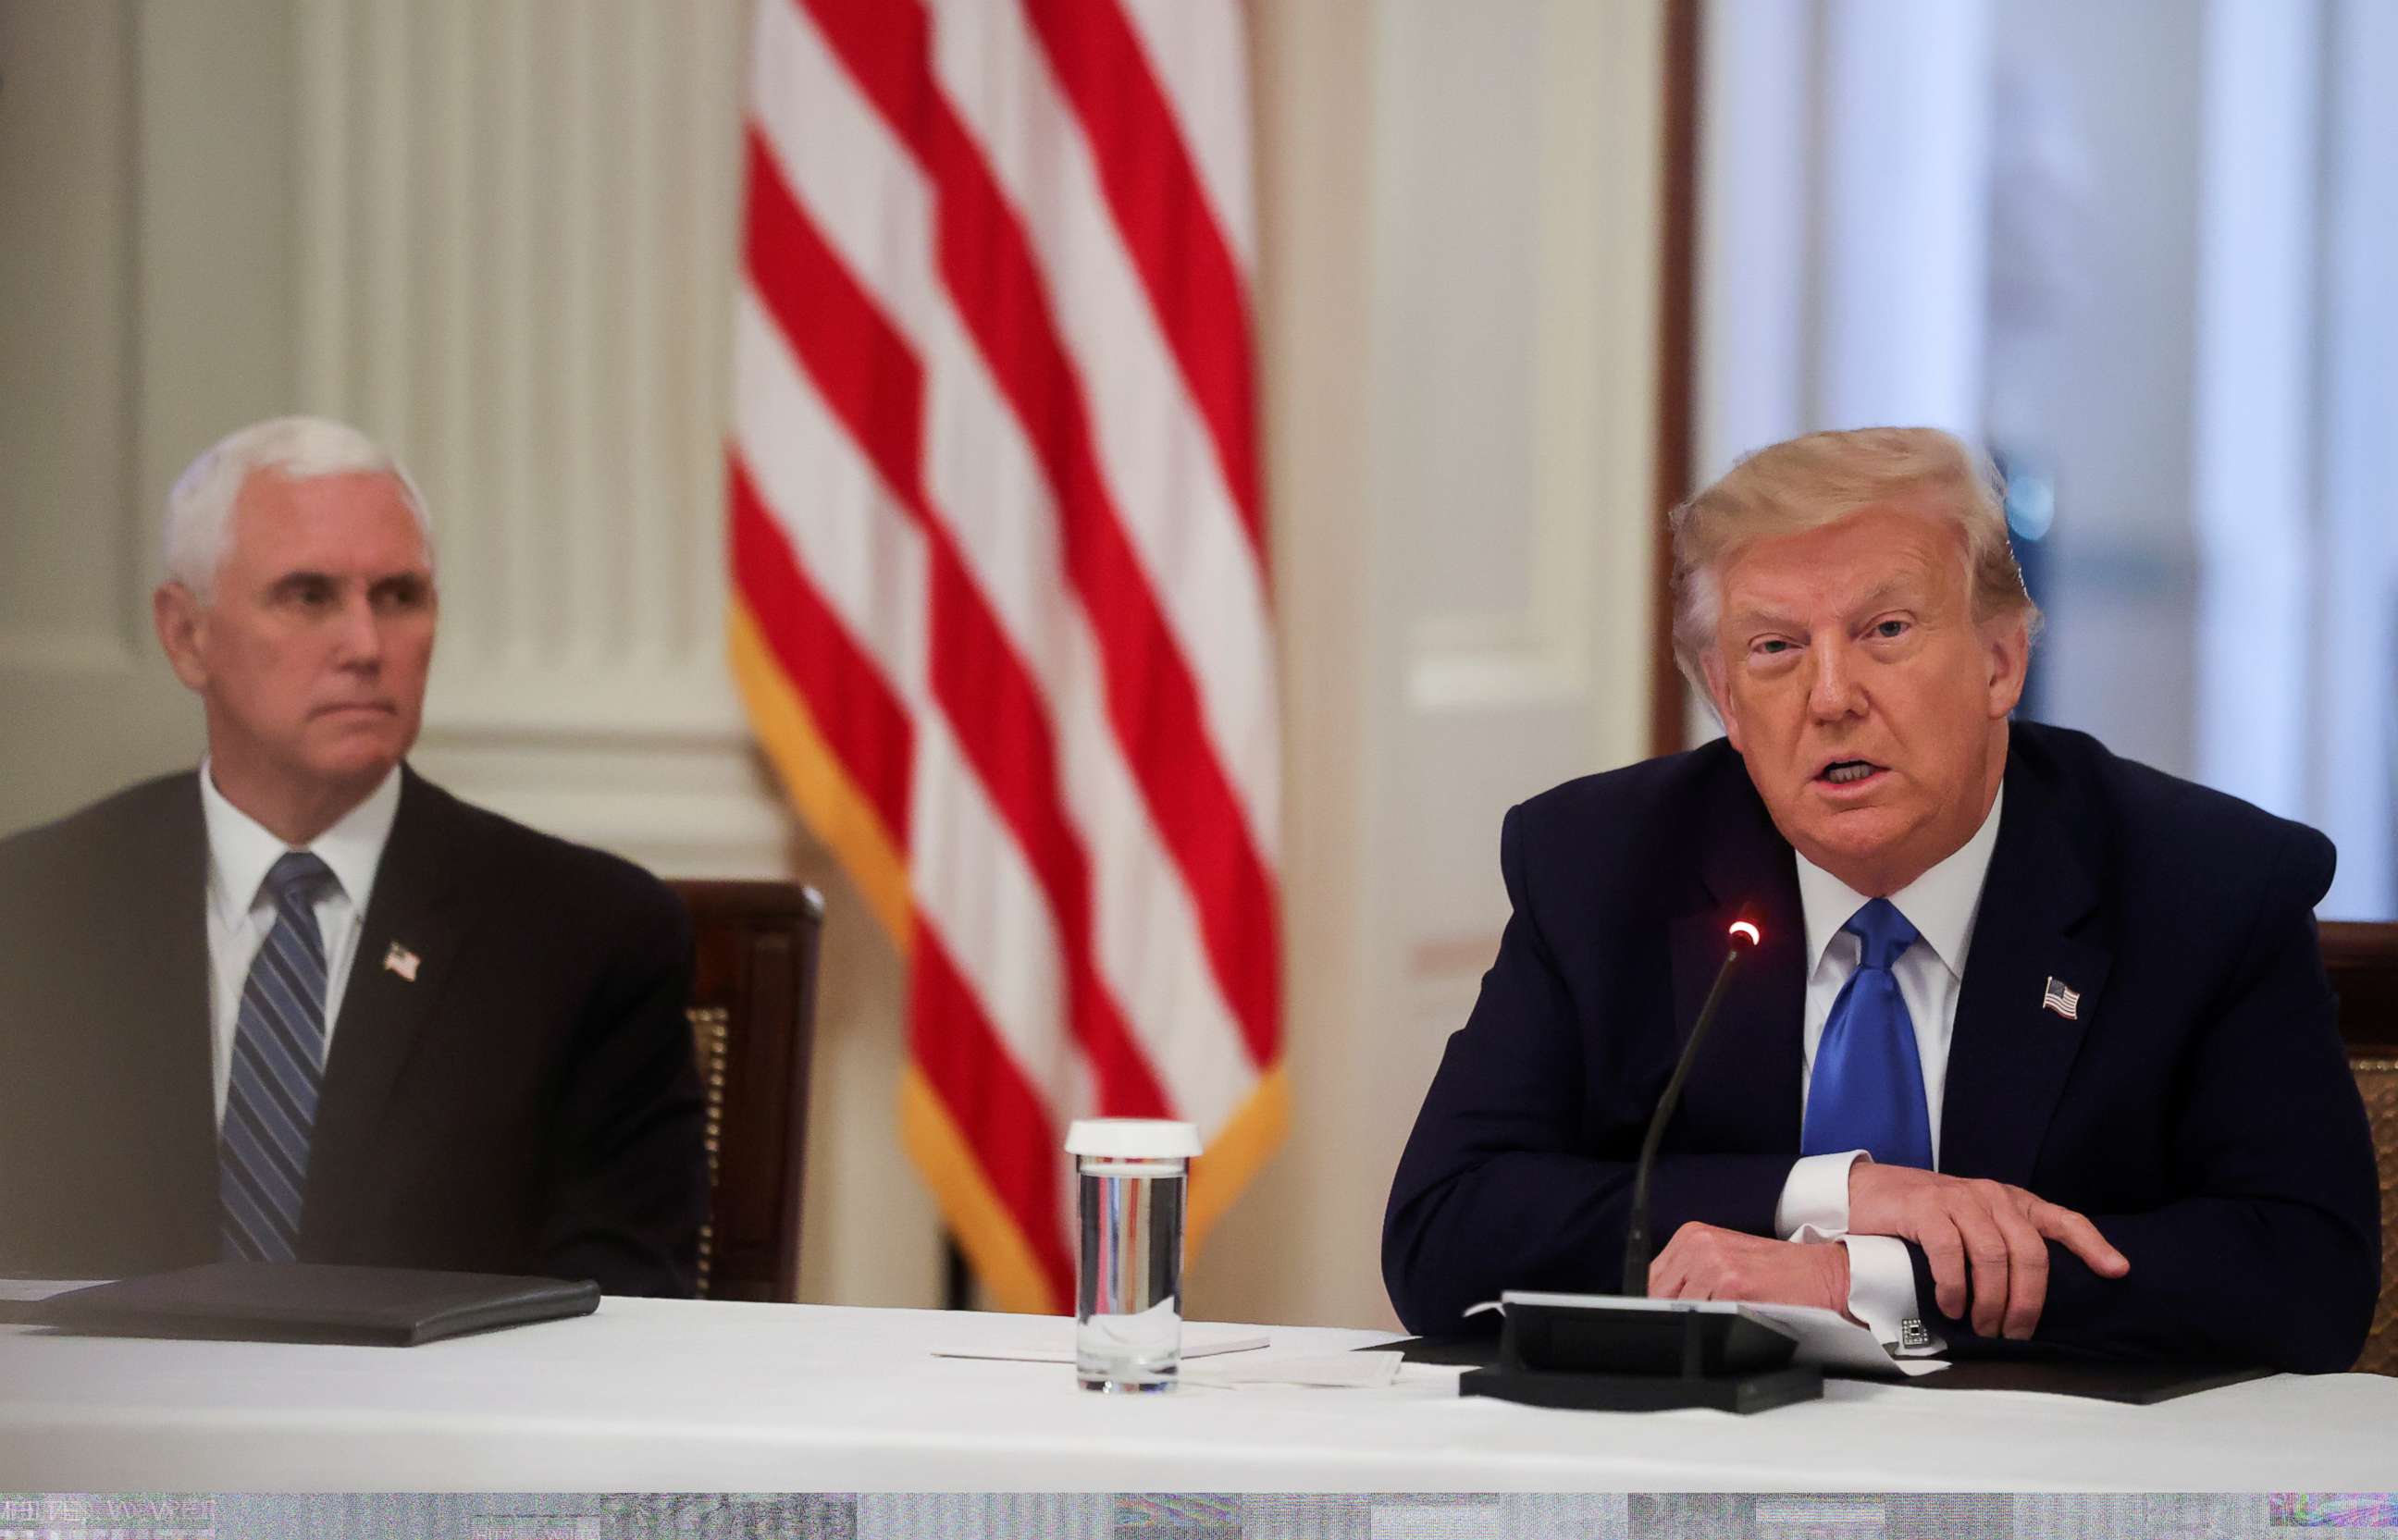 PHOTO: President Donald Trump speaks next to Vice President Mike Pence during a roundtable discussion on law enforcement in the East Room of the White House in Washington, U.S., July 13, 2020.